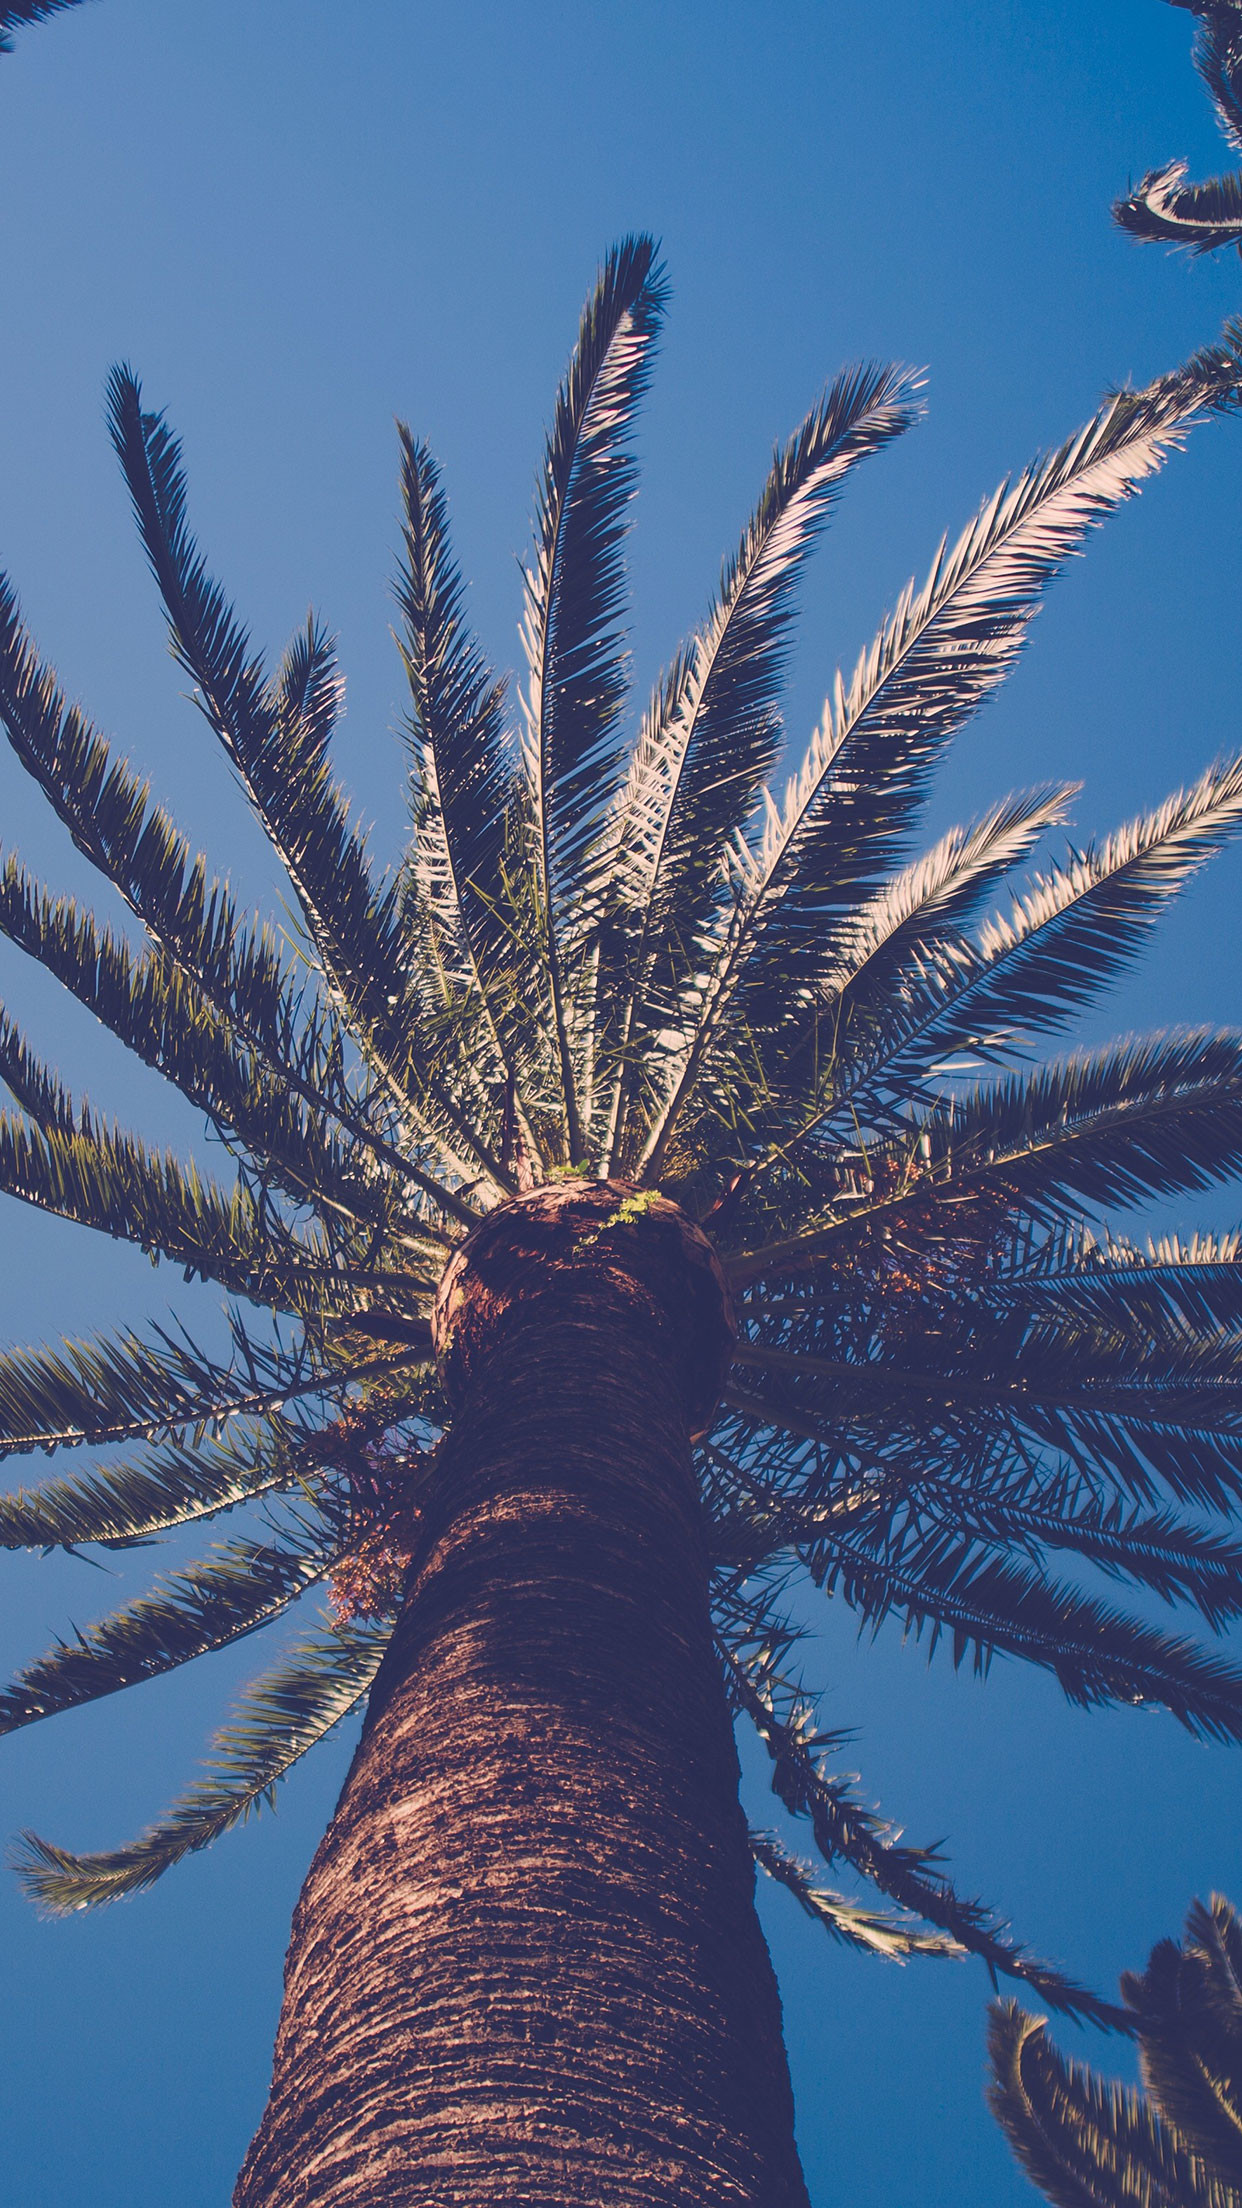 Palm Tree Iphone Wallpaper 67 Images